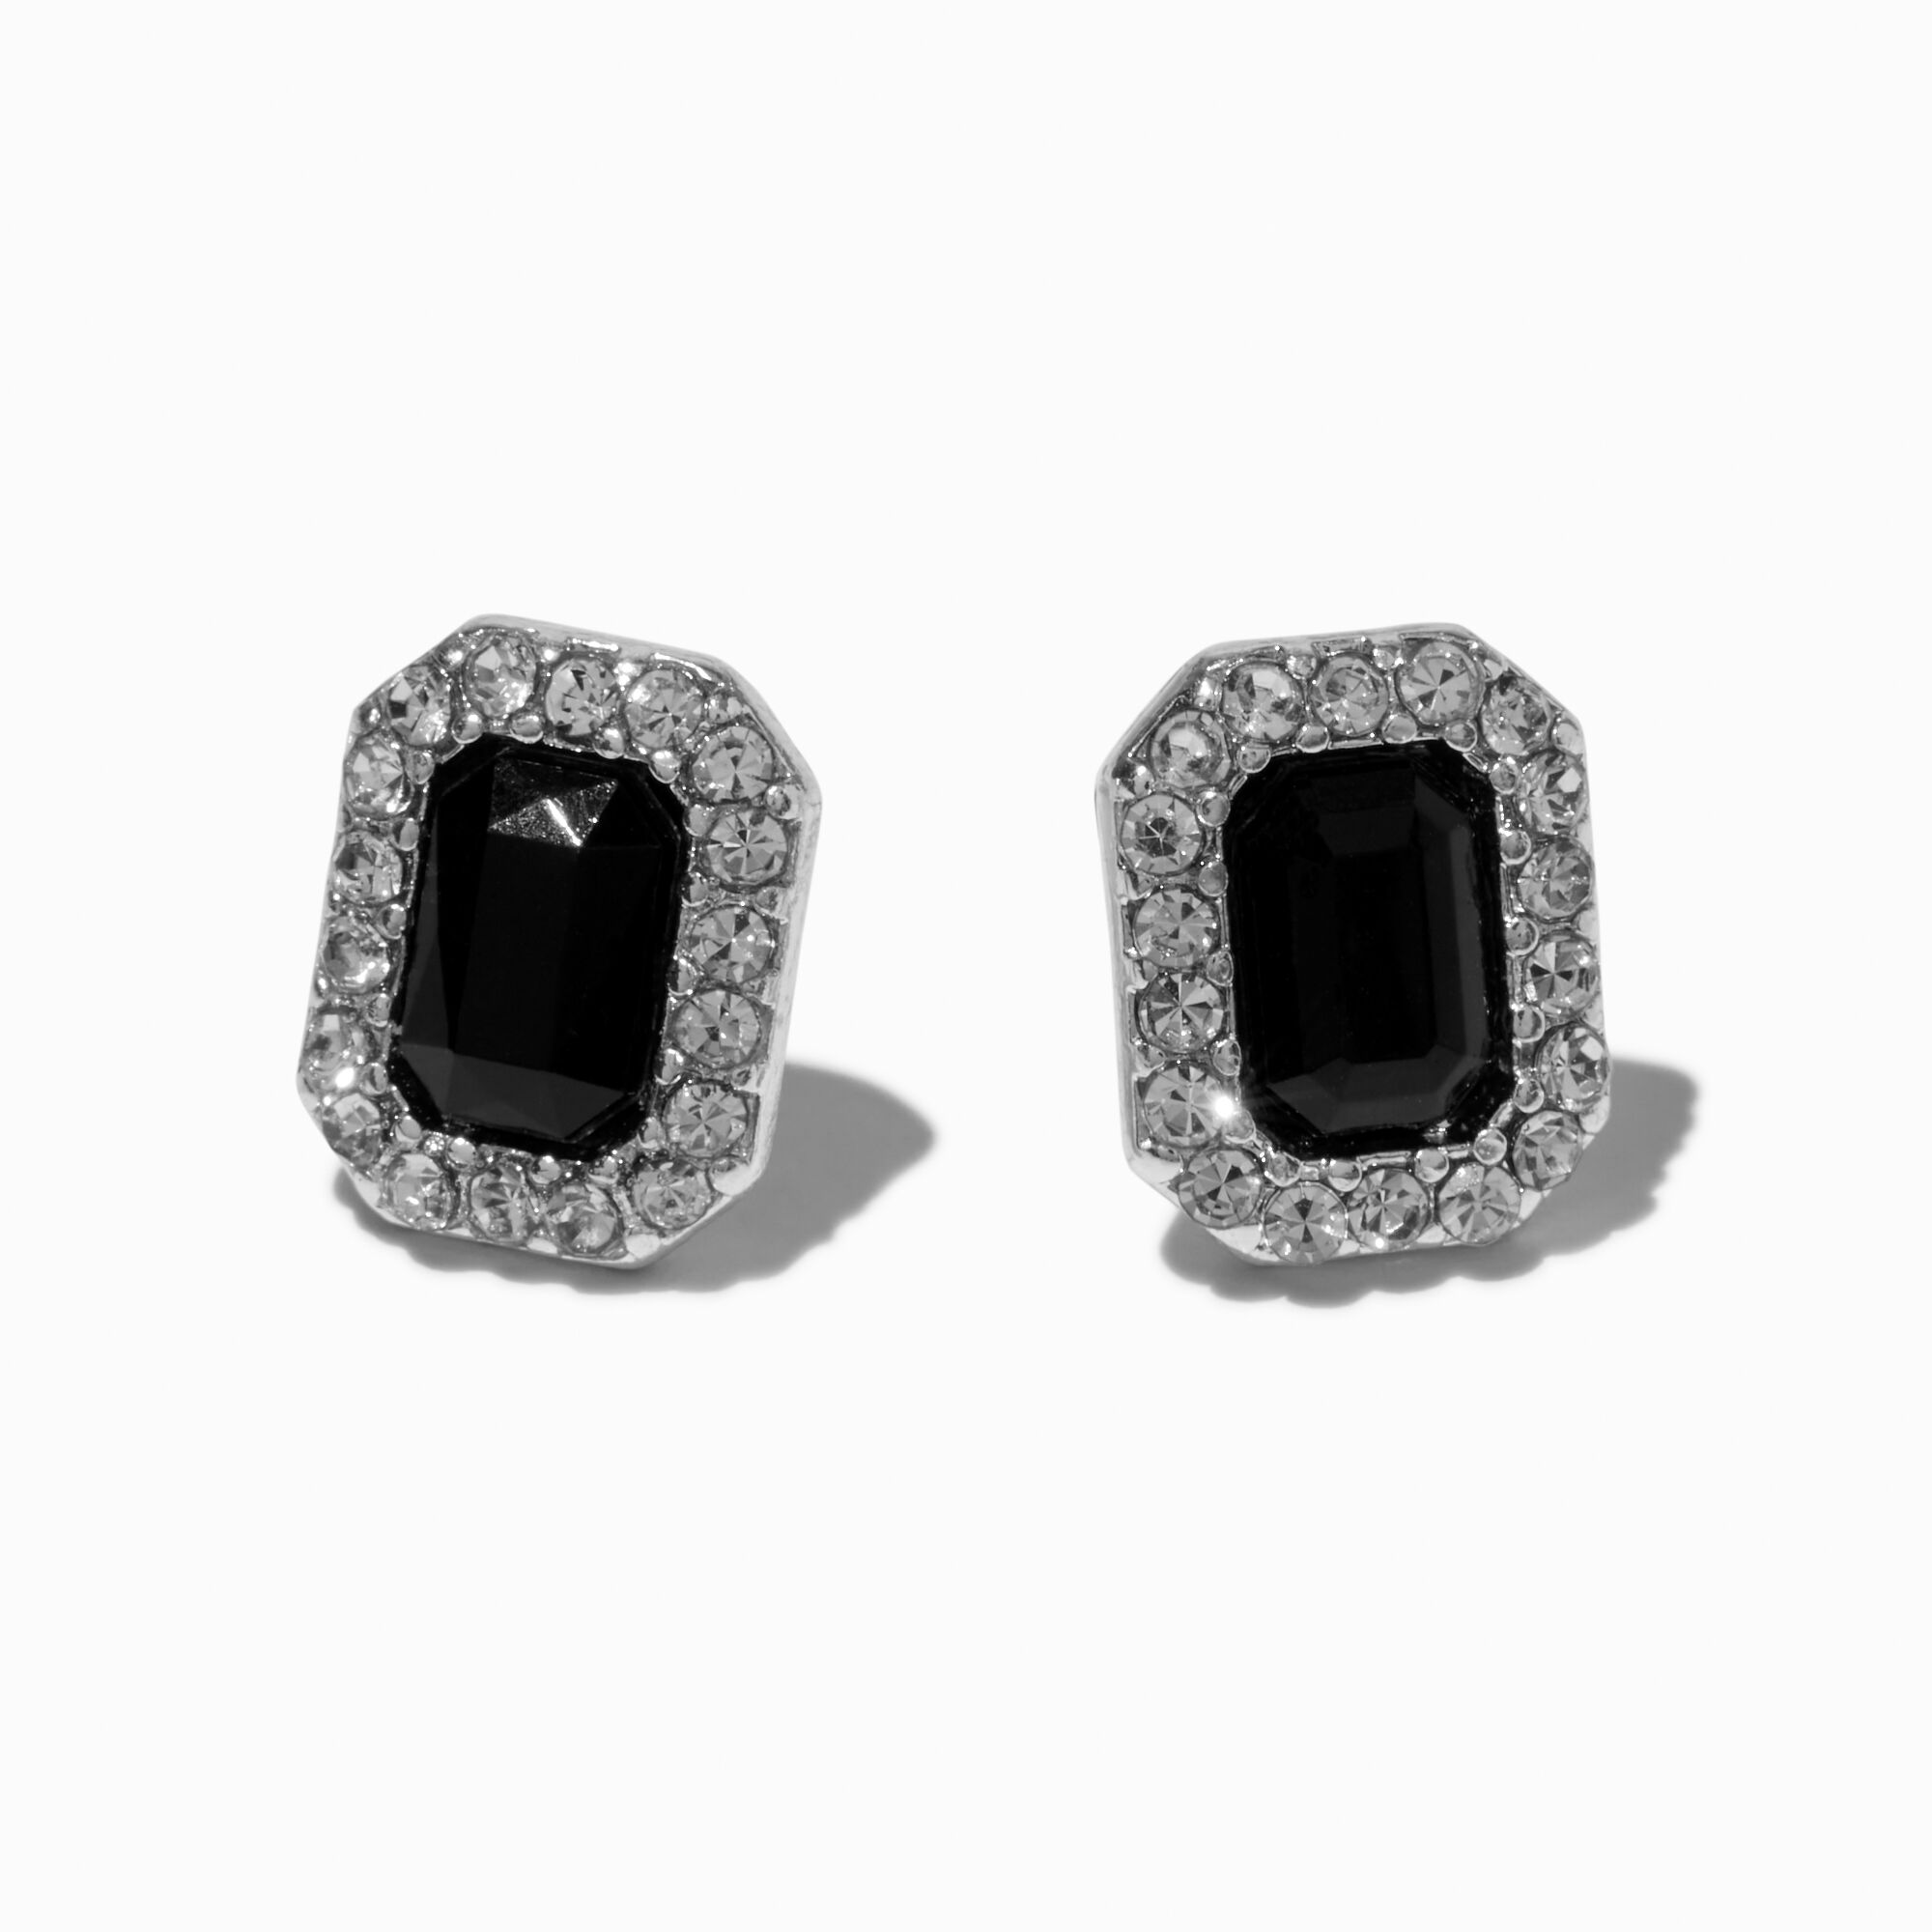 View Claires Halo Stud Earrings Black information